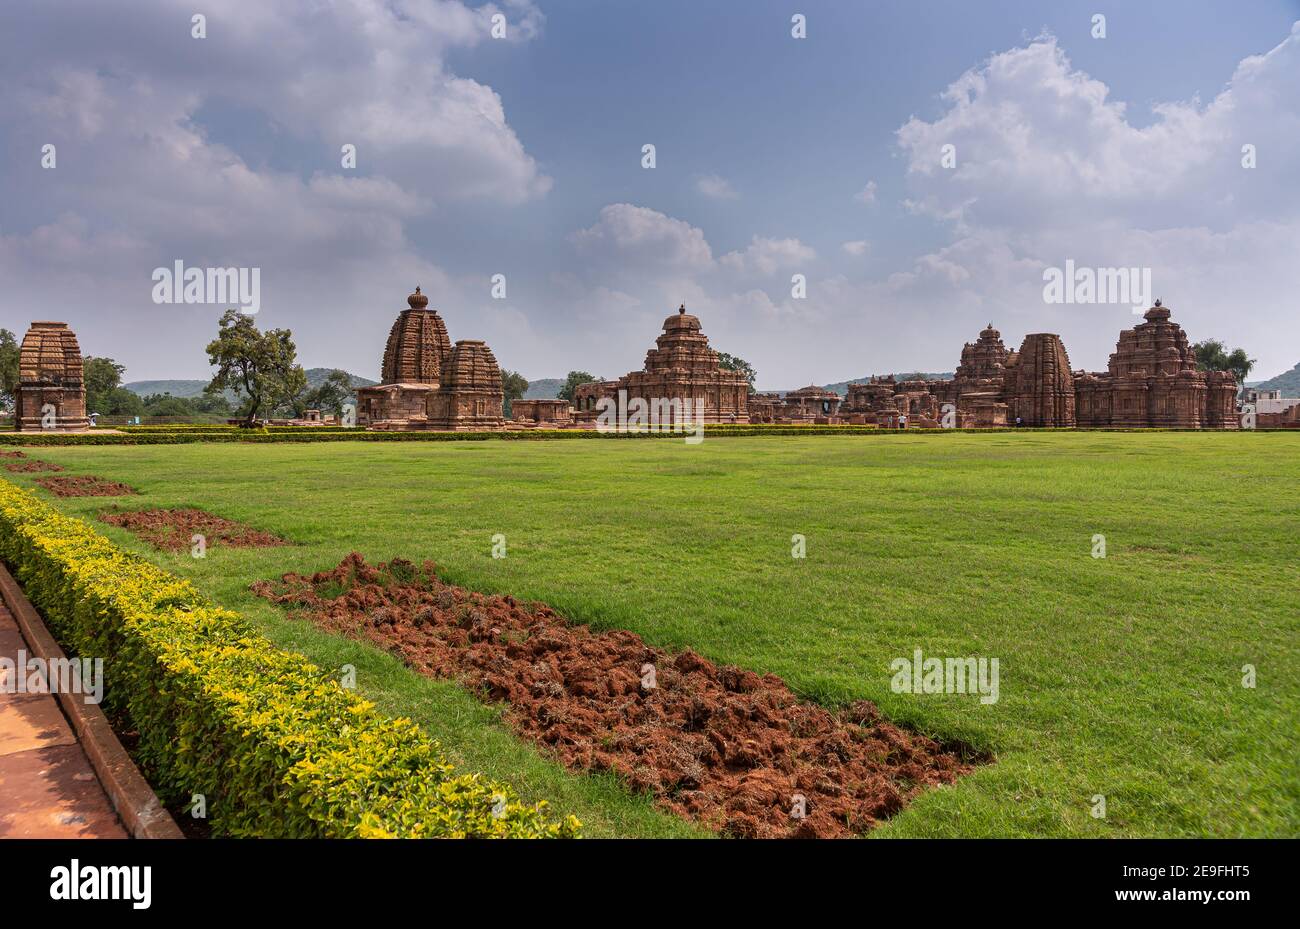 Bagalakote, Karnataka, India - November 7, 2013: Pattadakal temple complex. Wide landscape view on conglomerate of brown buildings under blue cloudsca Stock Photo